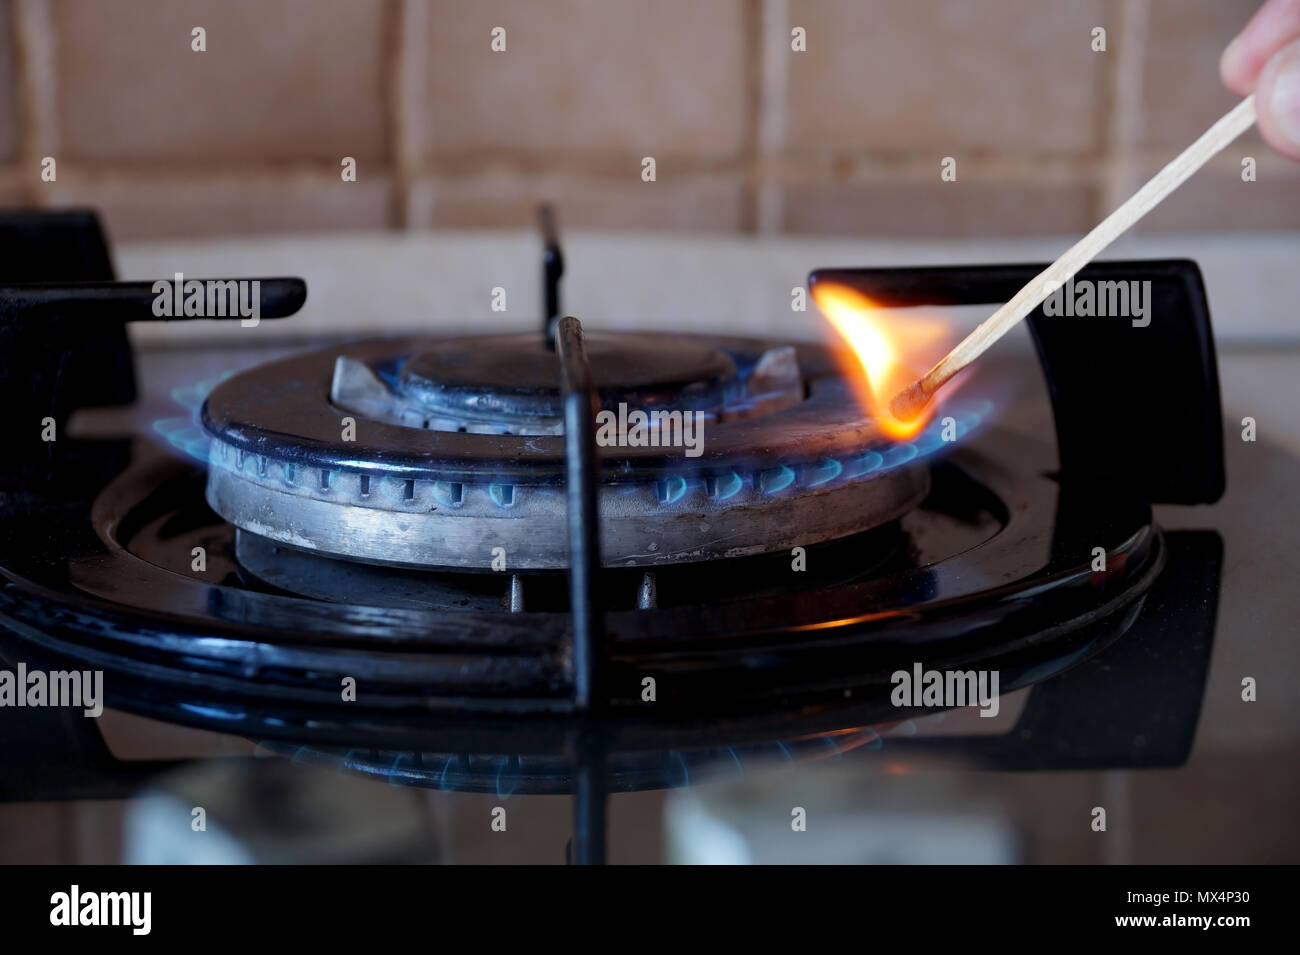 Ignition of a gas ring on the stove Stock Photo